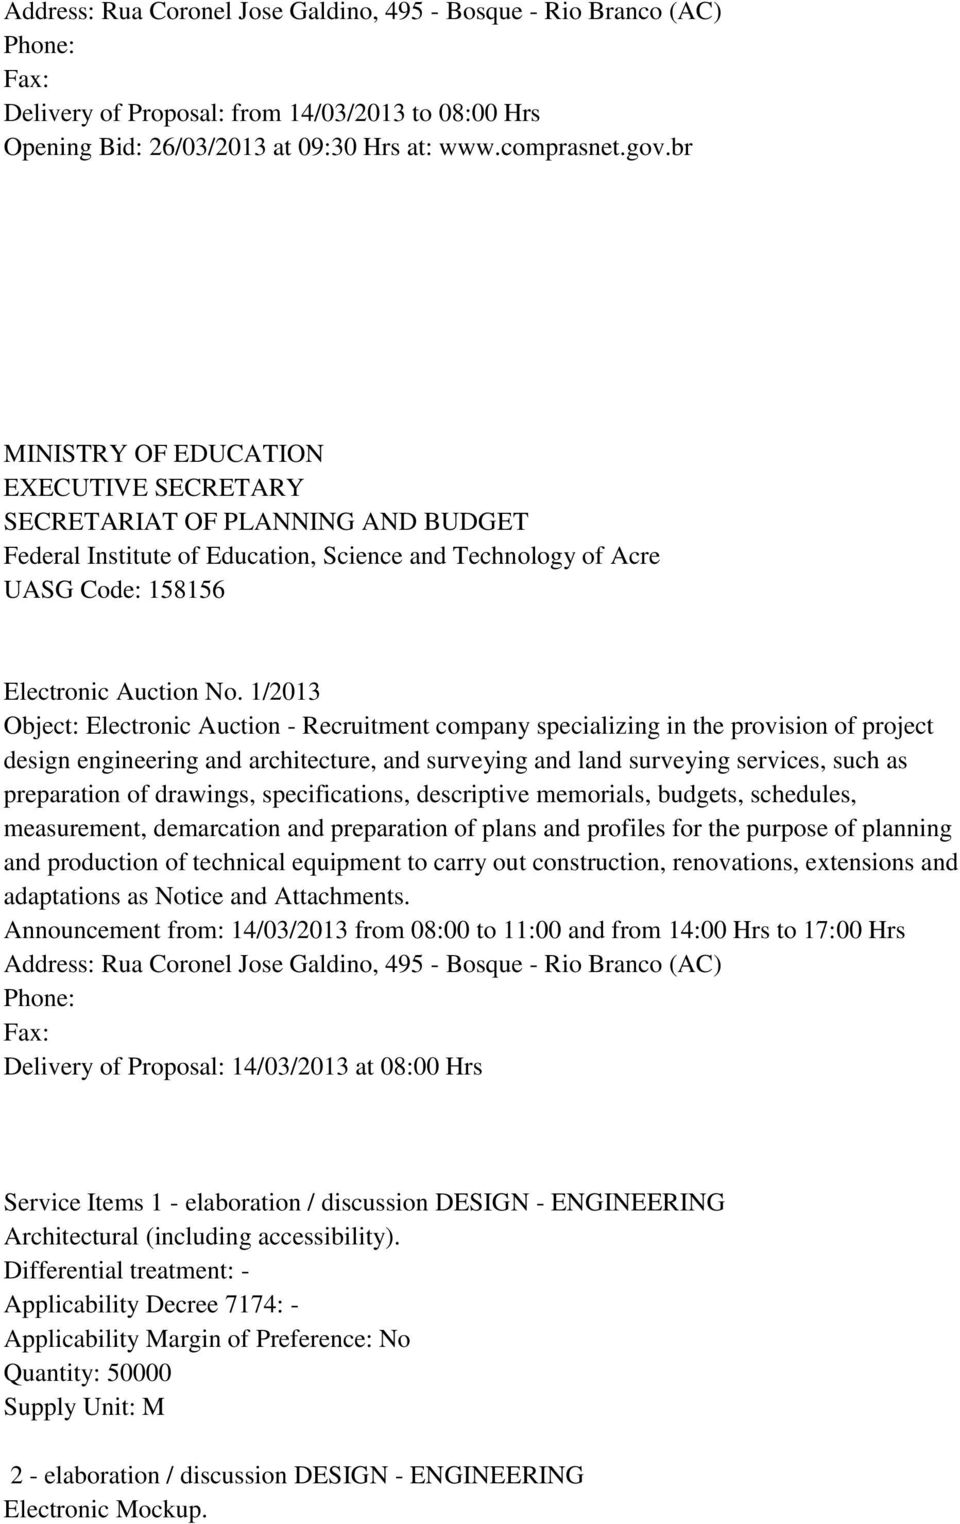 1/2013 Object: Electronic Auction - Recruitment company specializing in the provision of project design engineering and architecture, and surveying and land surveying services, such as preparation of